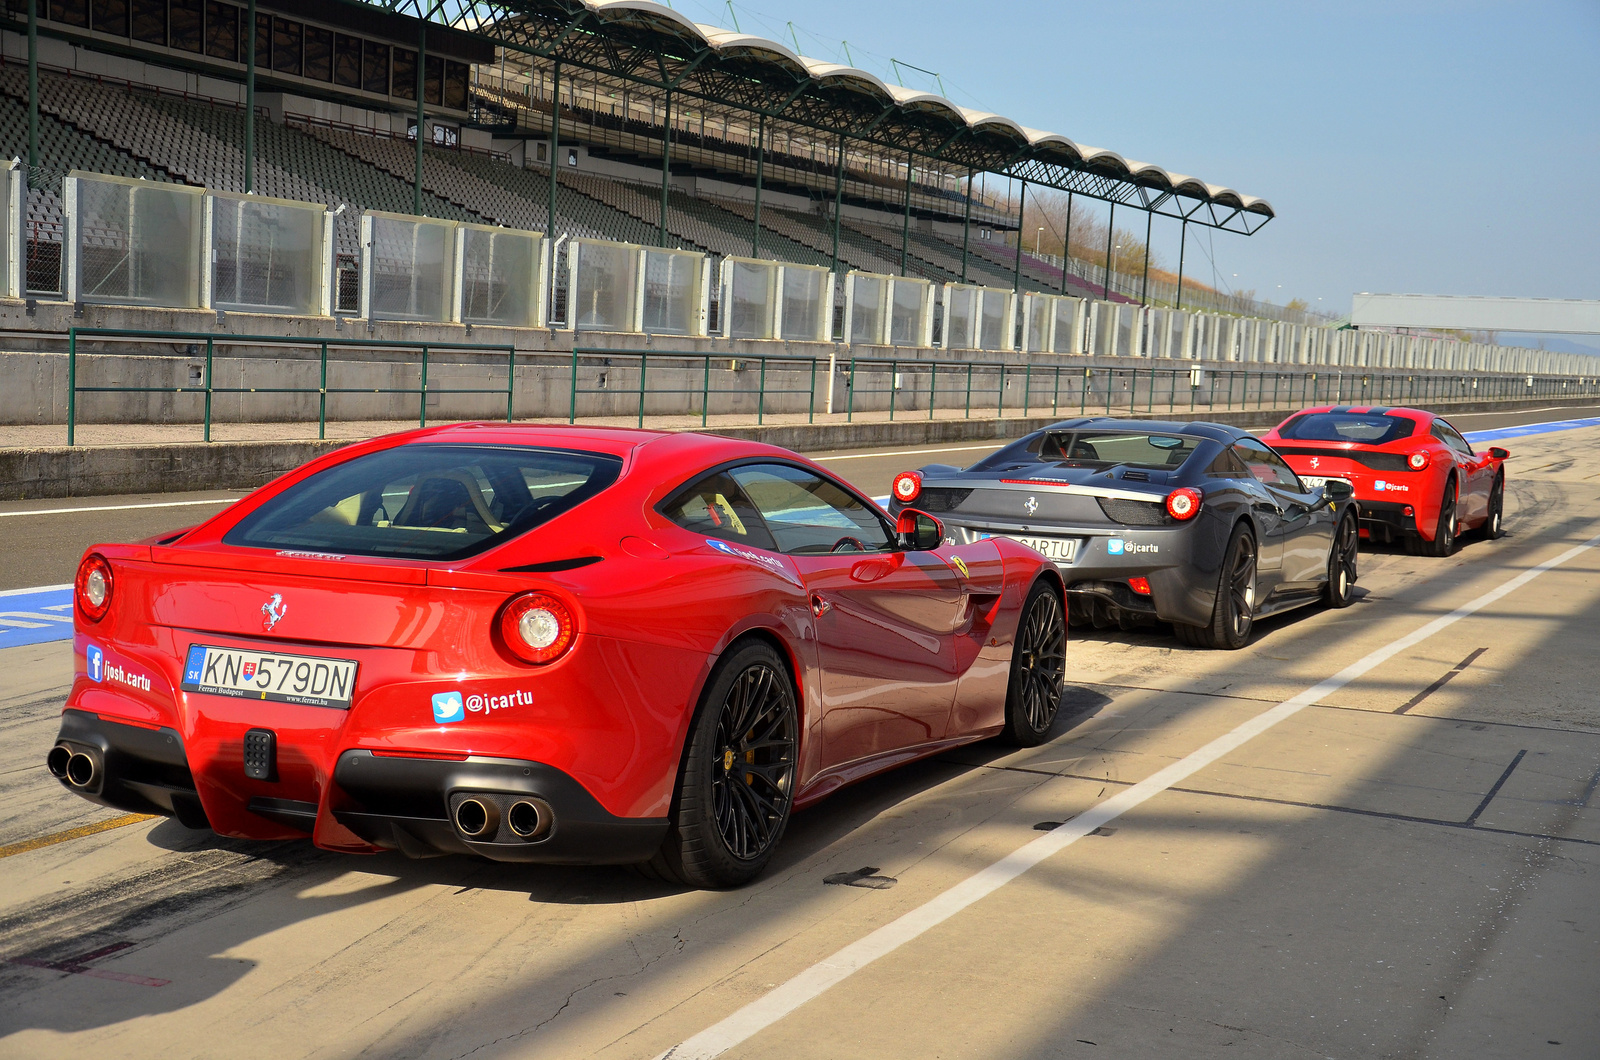 F12 - Spider - Speciale